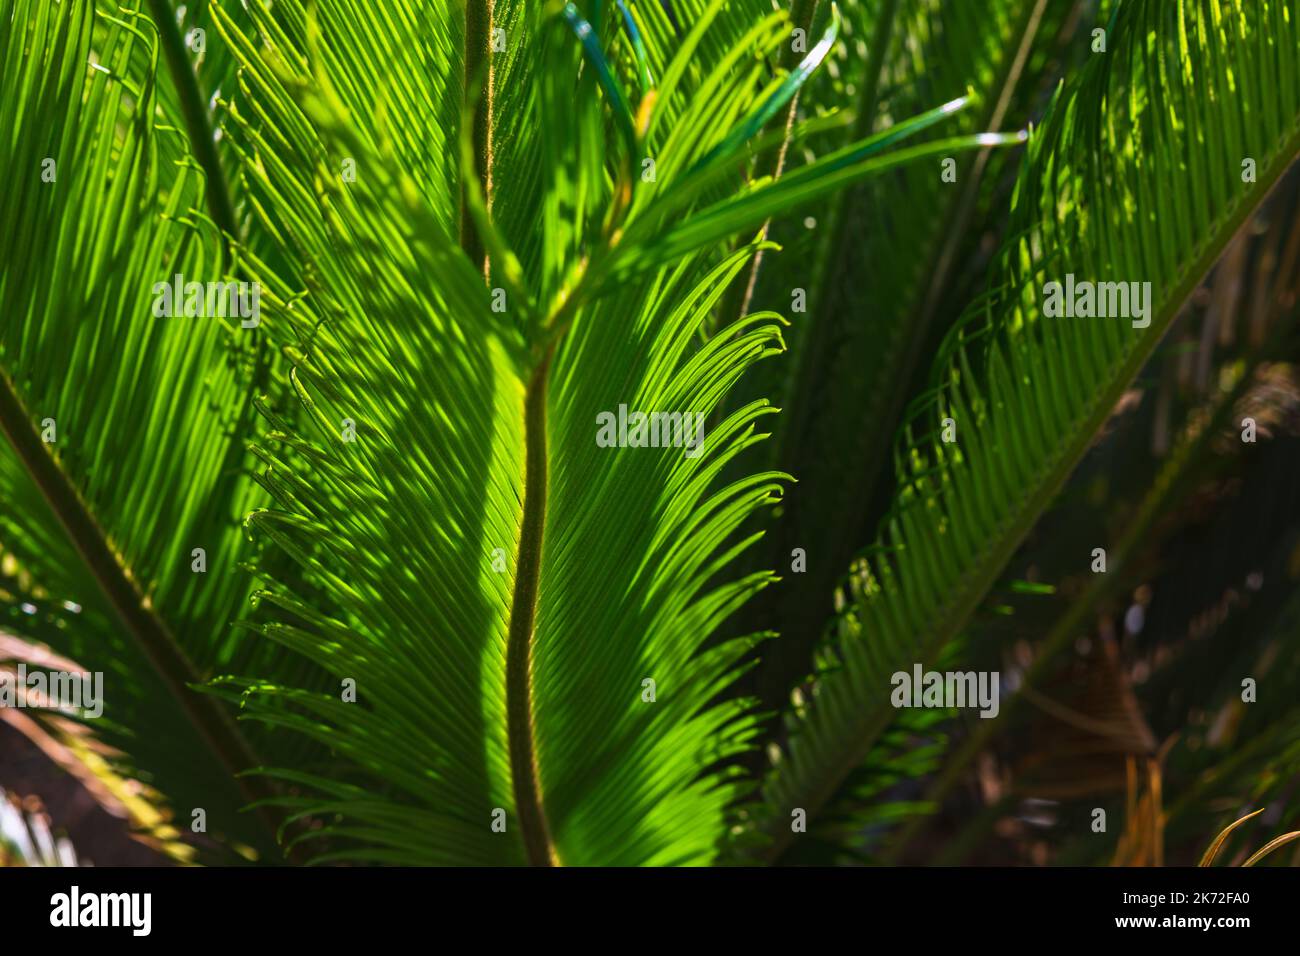 Leaves of Cycas Revoluta or Sago Palm background photo. Decorative plants for gardens or parks. Stock Photo